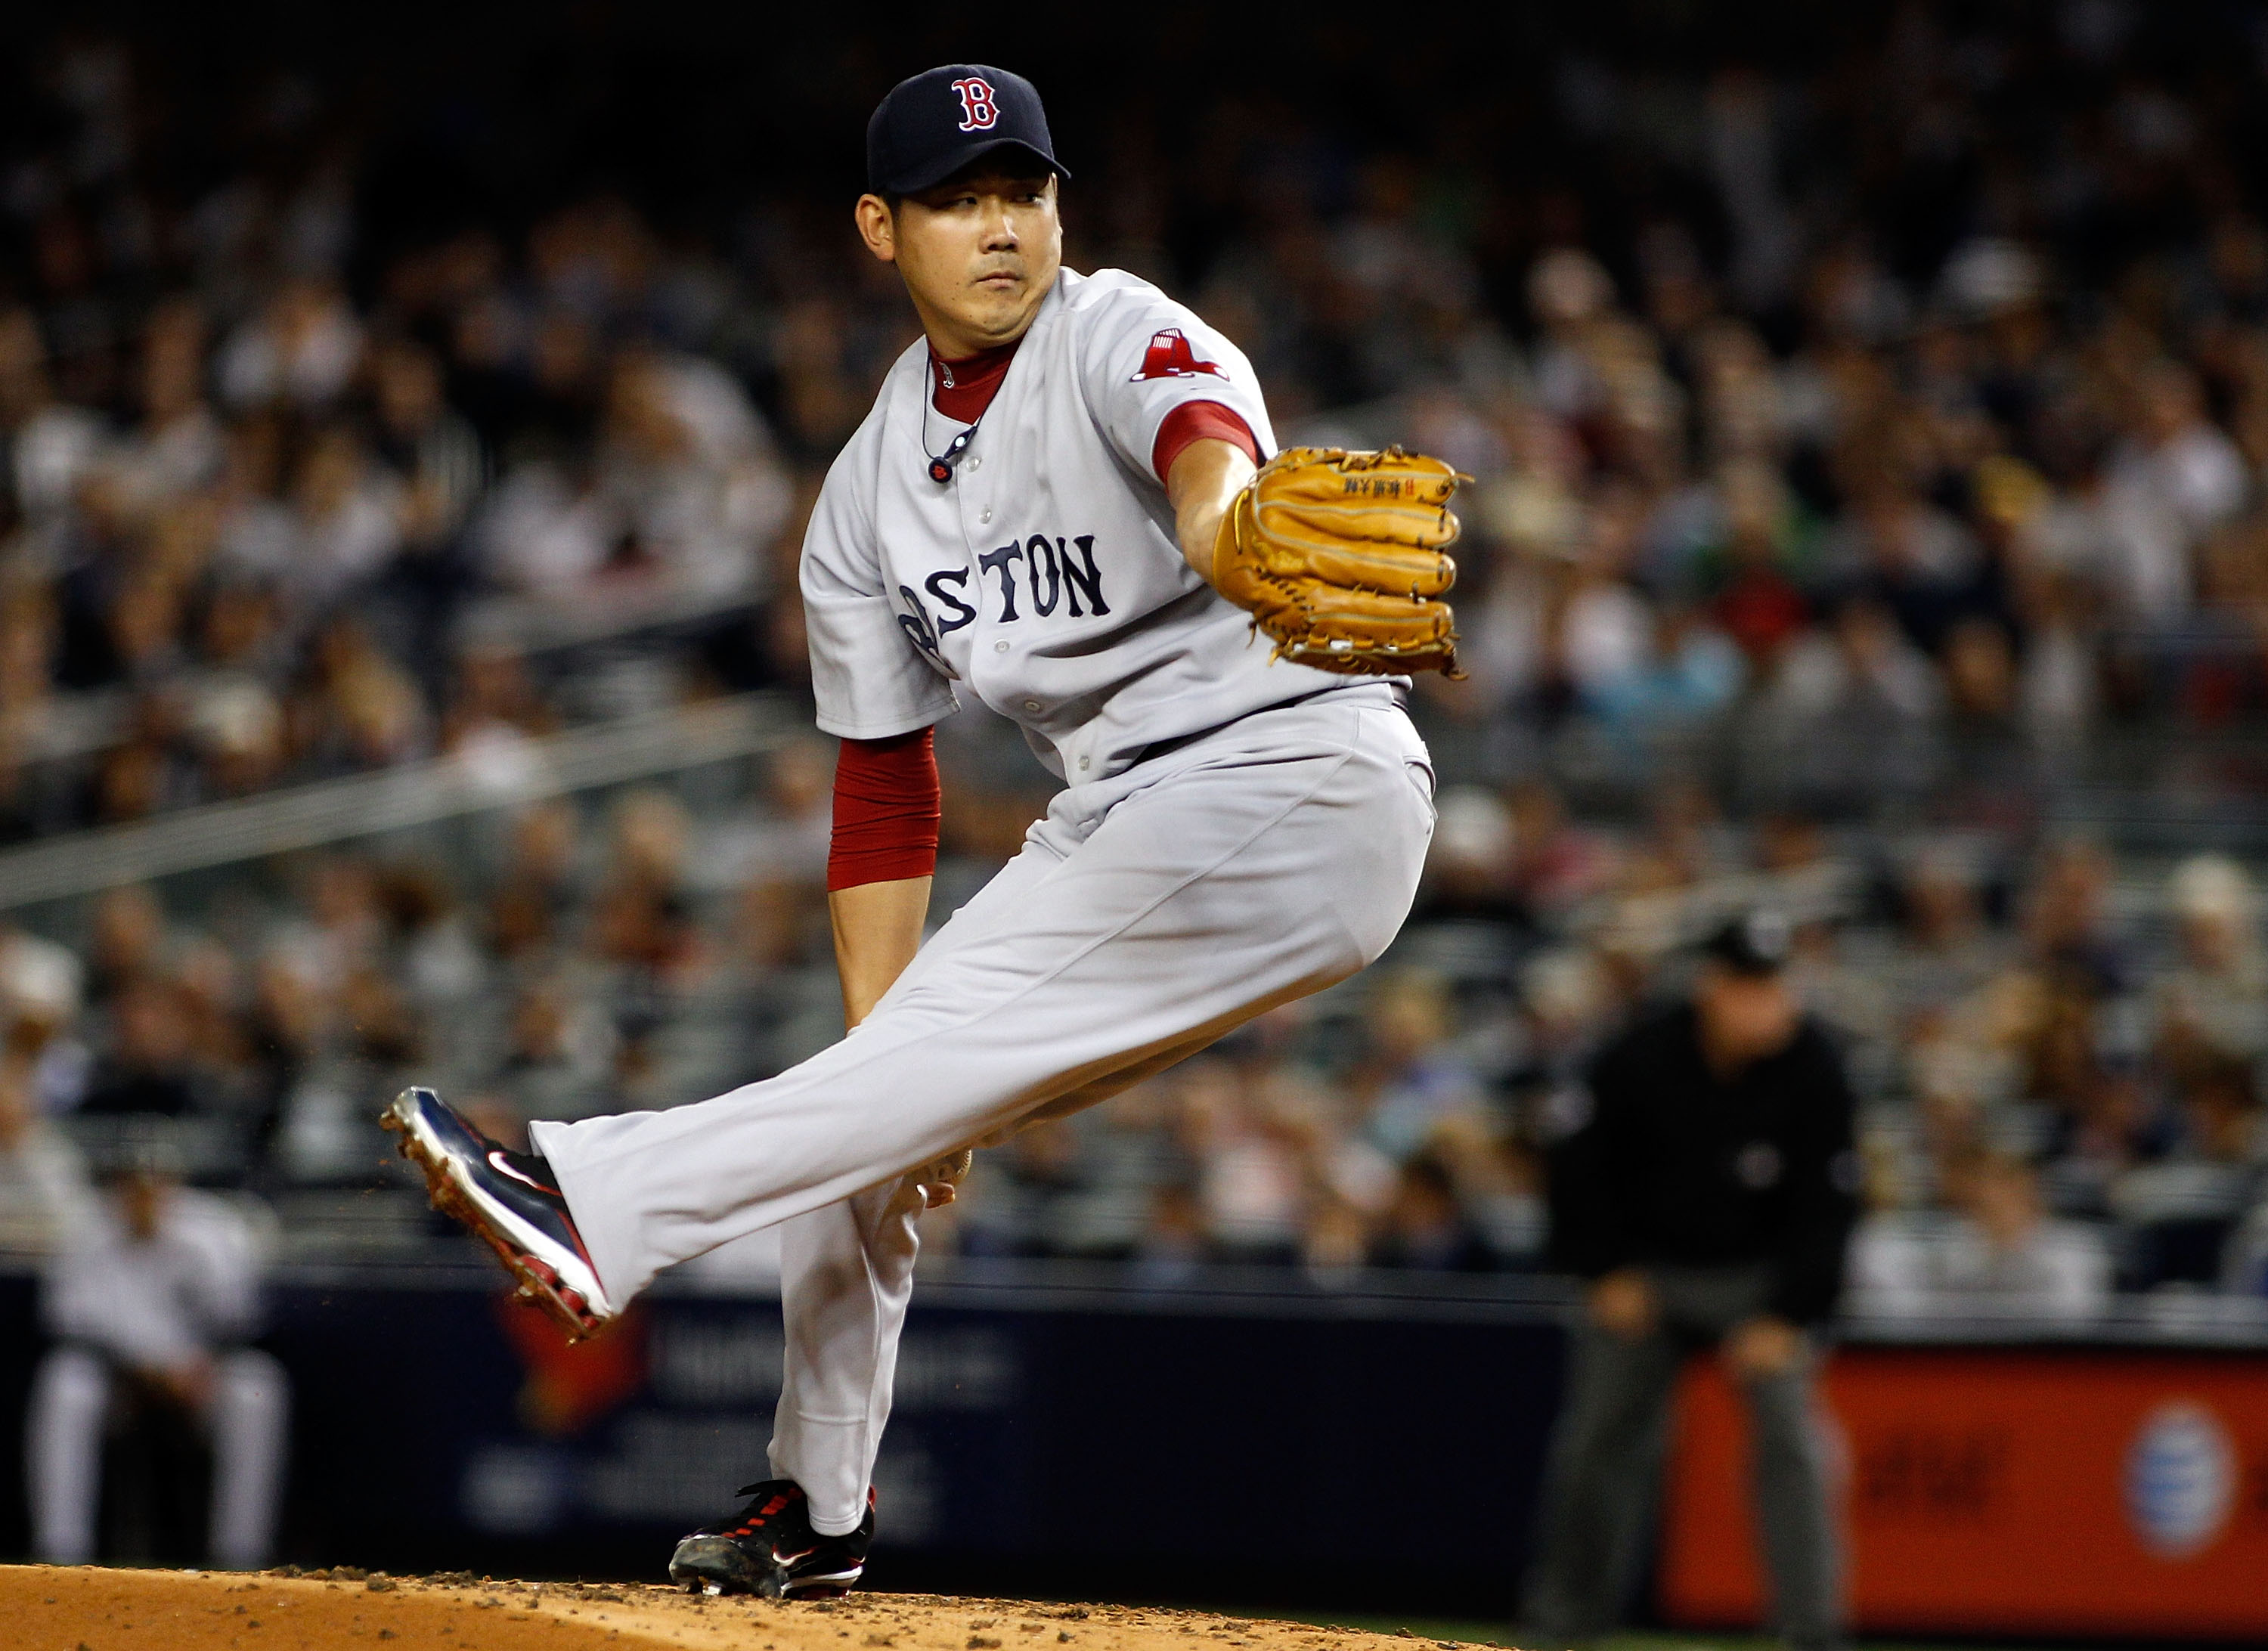 Boston Red Sox pitcher Daisuke Matsuzaka delivers a pitch during